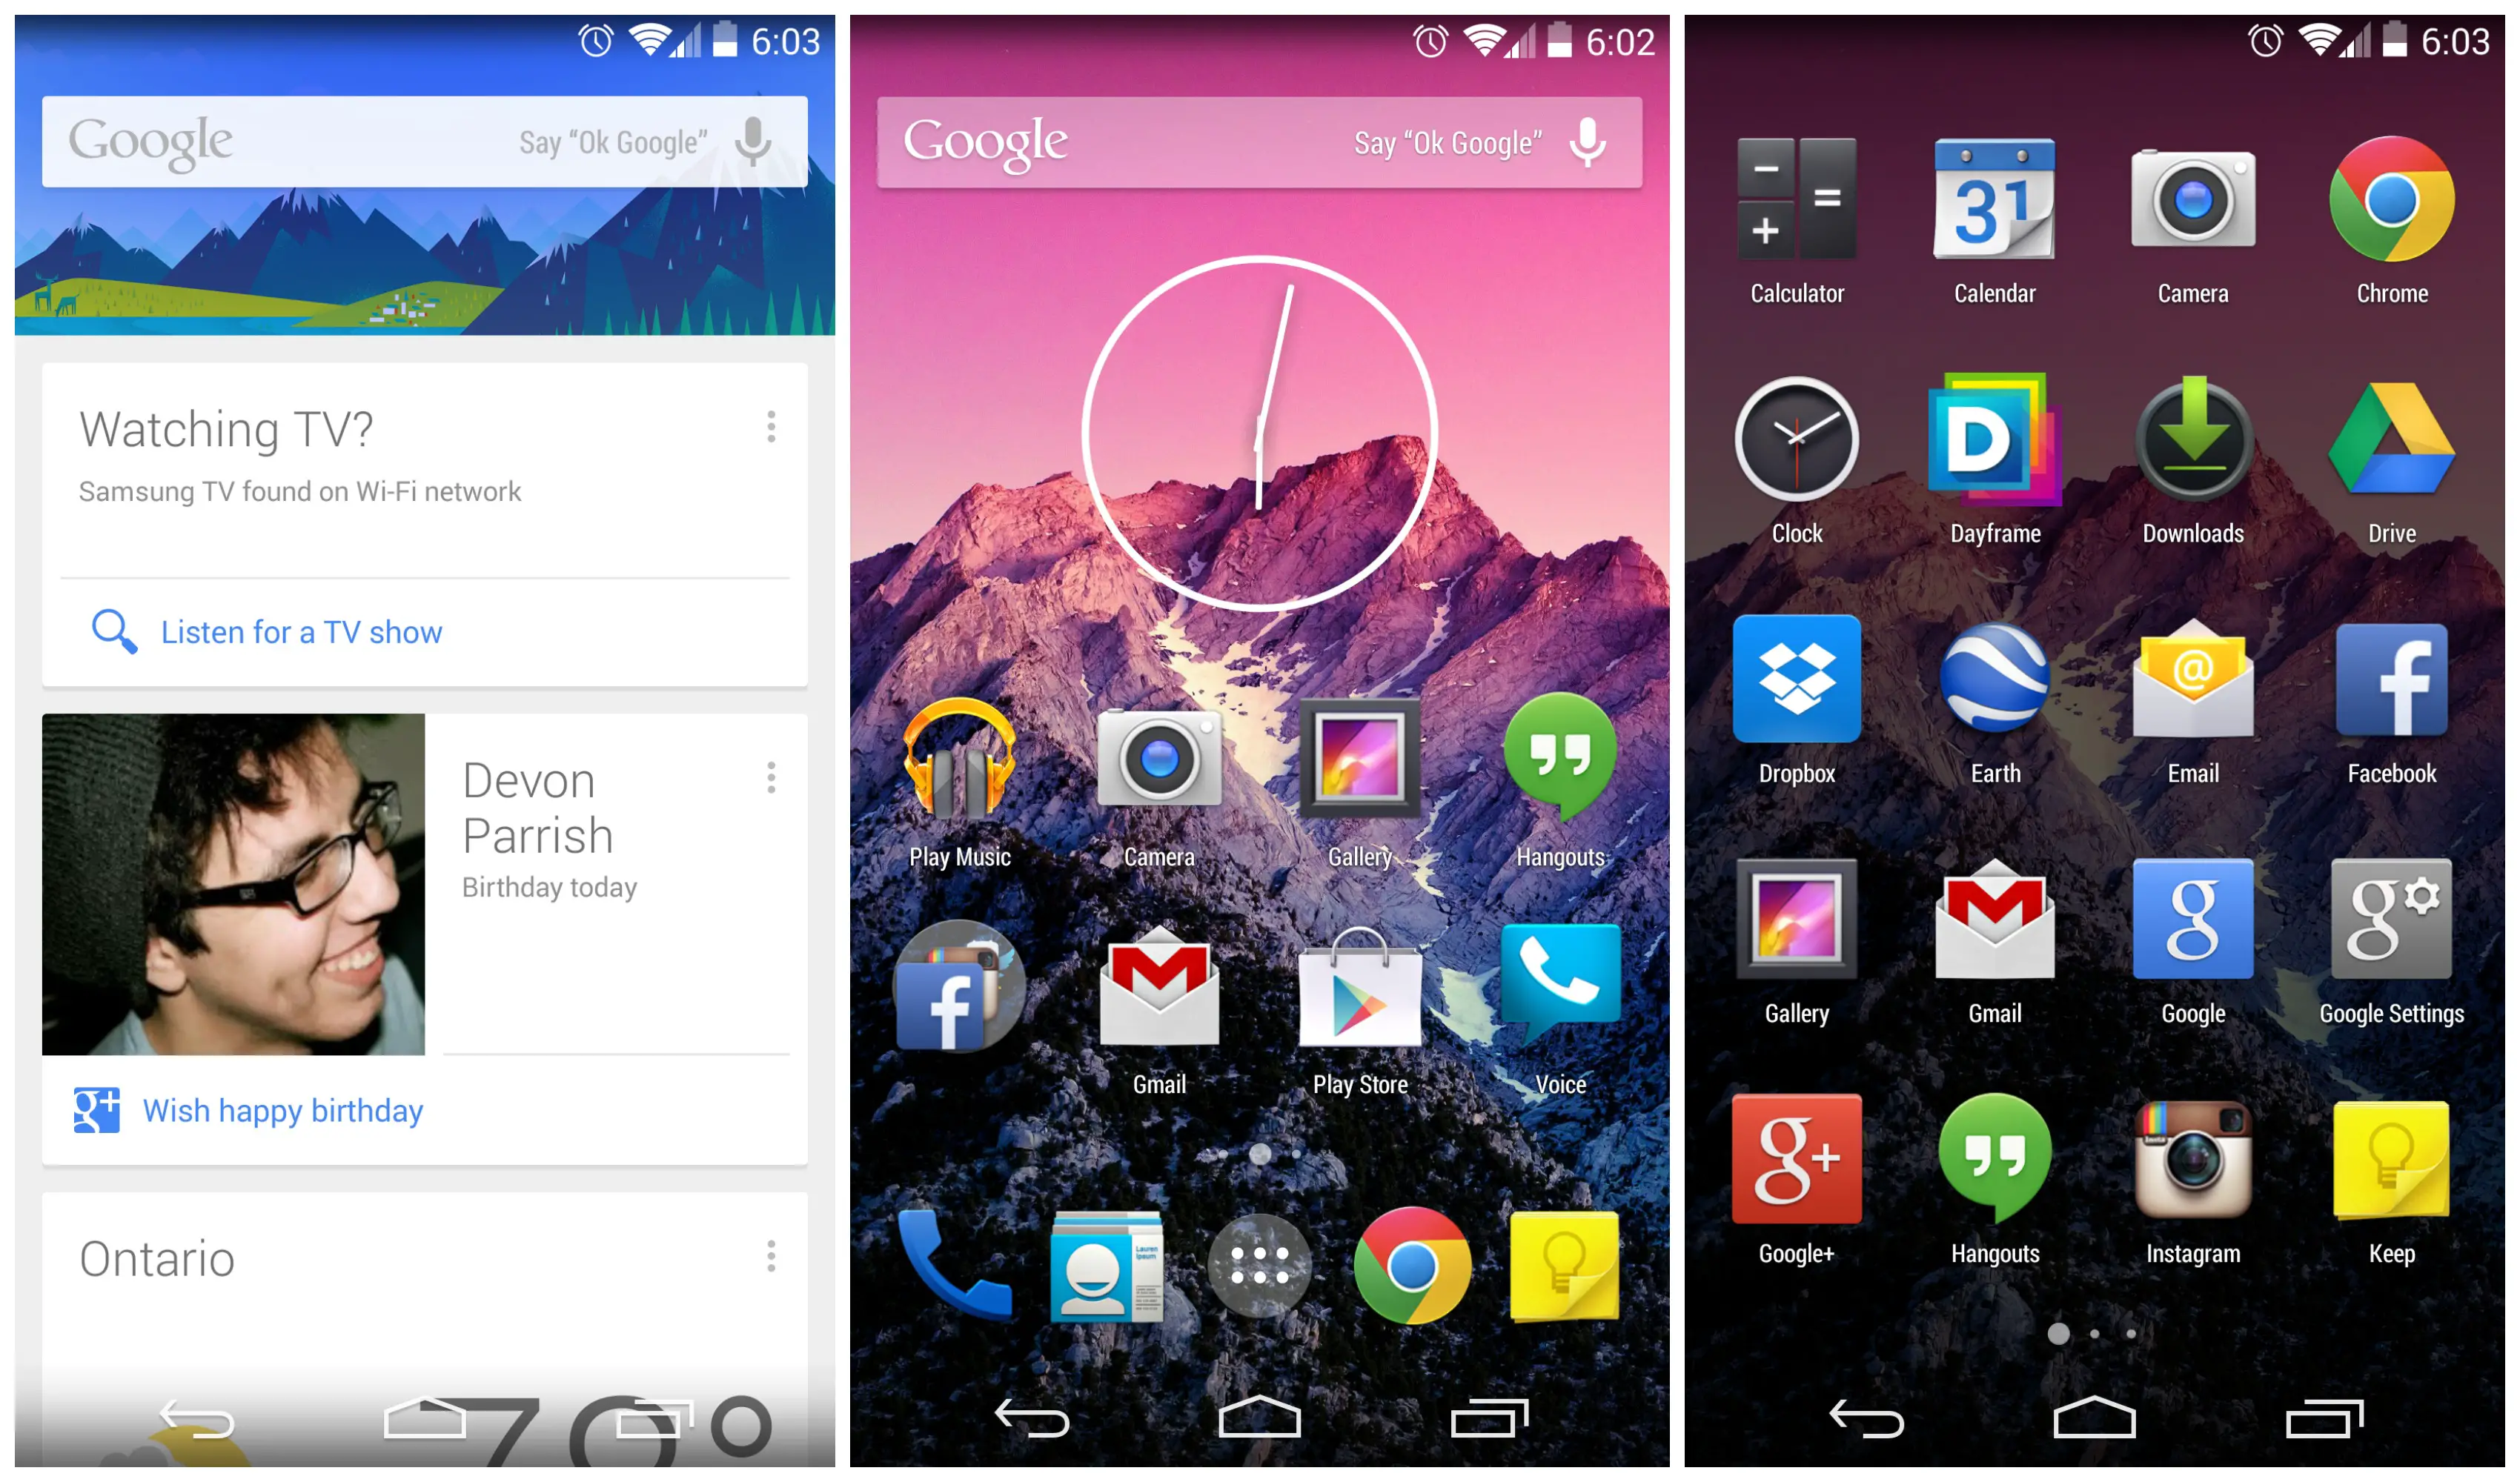 Google Chrome Apk Download For Android 4.4 2